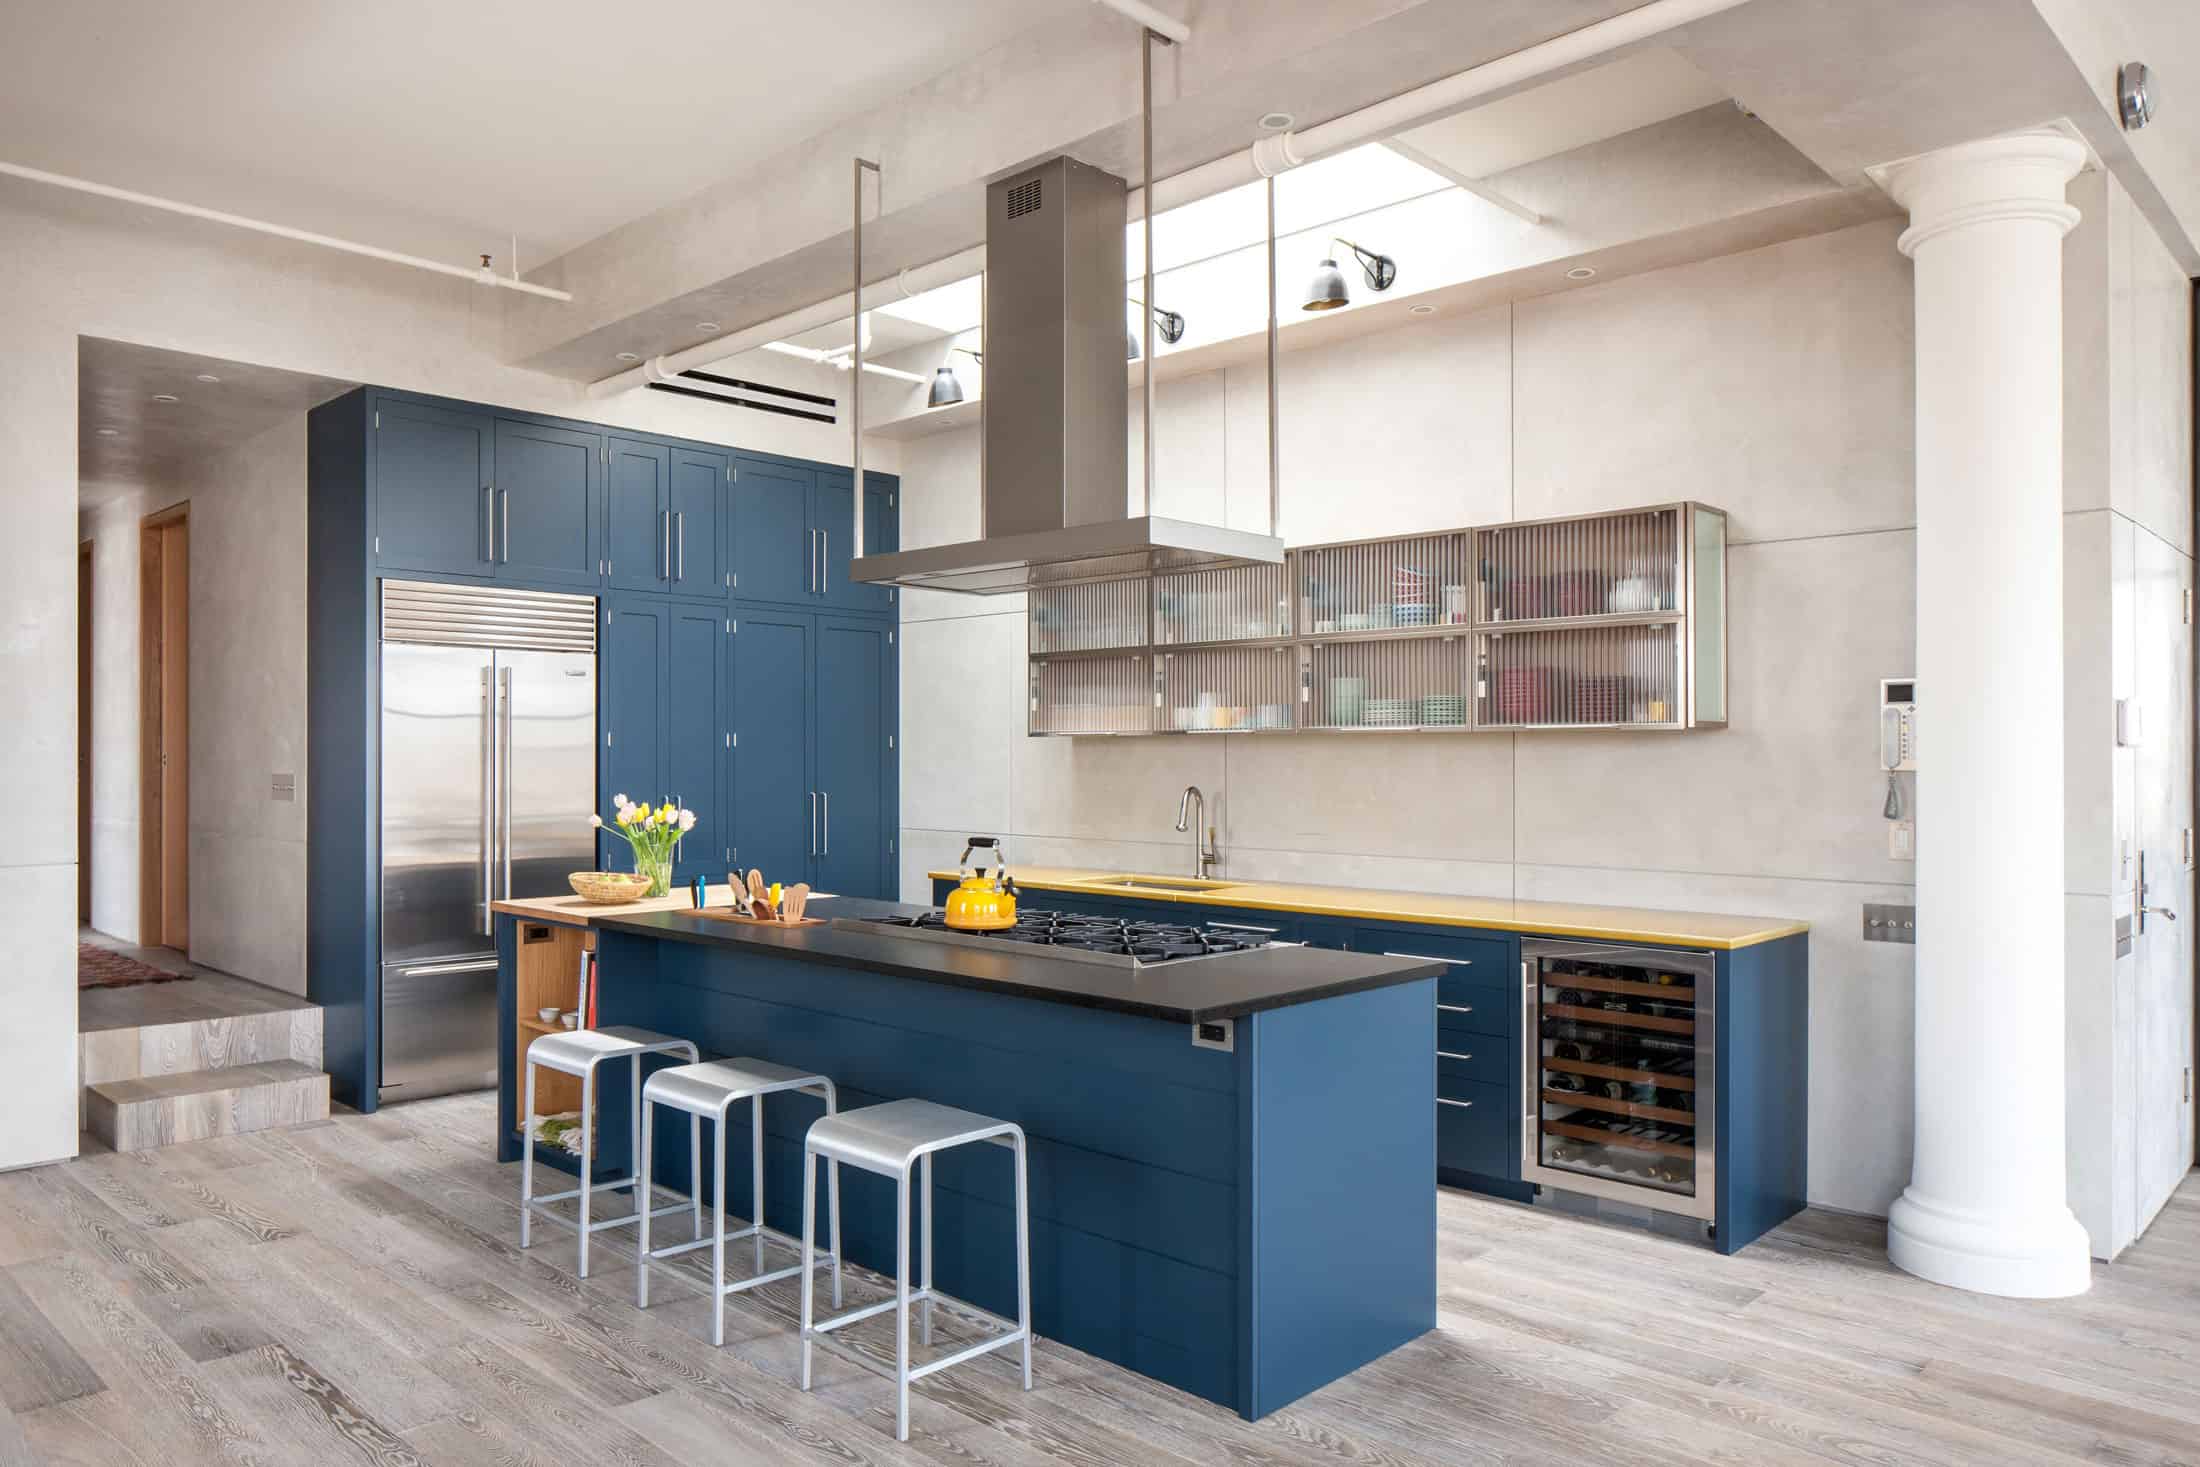 Royal Blue Kitchen on Light Color Floors is a Modern Contemporary Dream